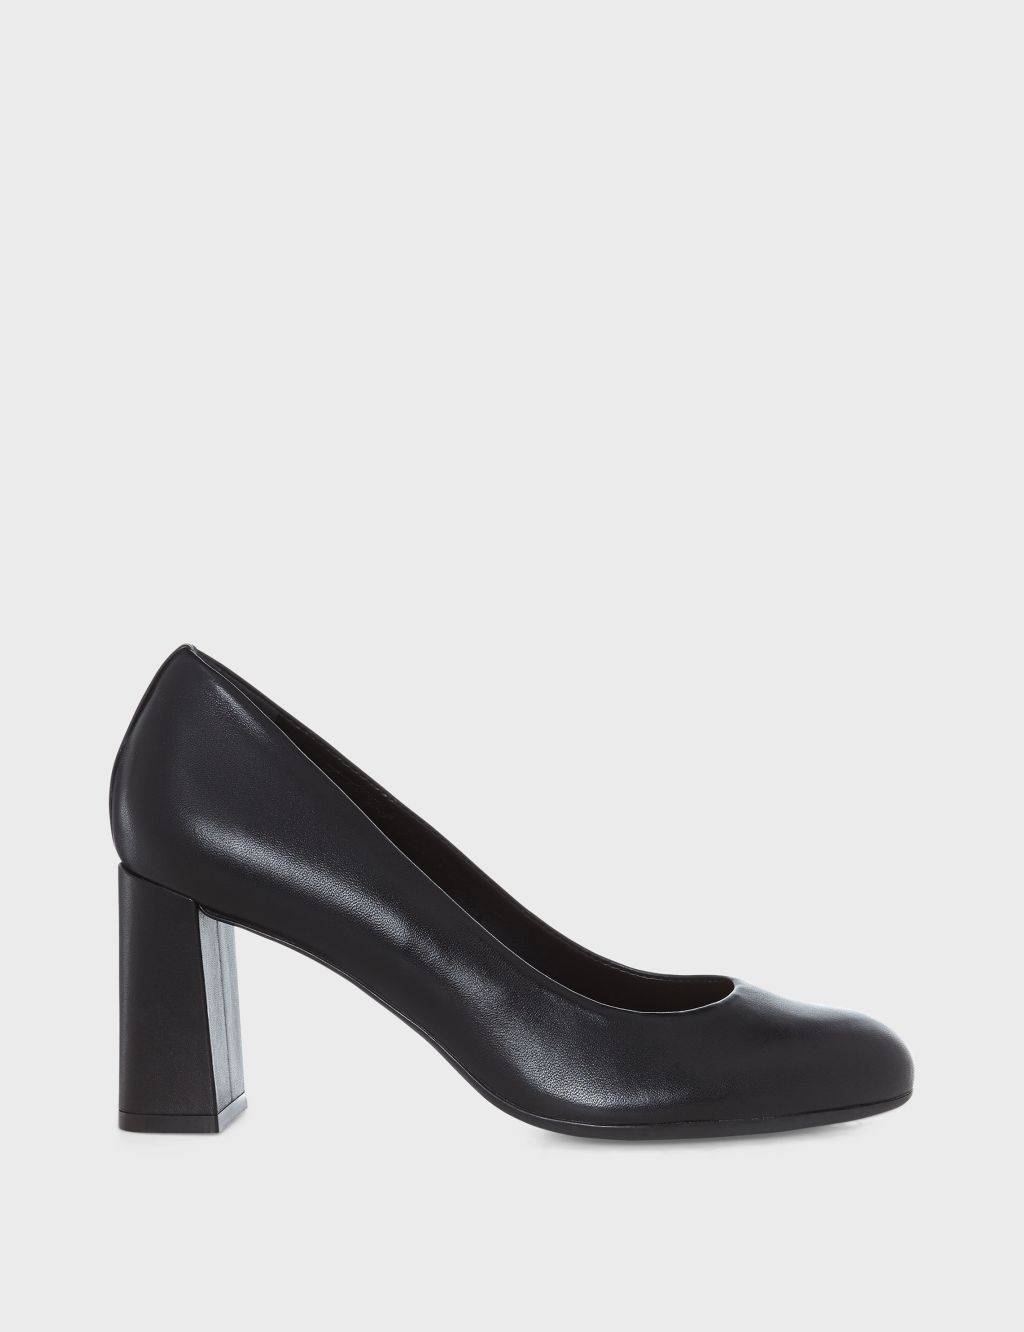 Leather Block Heel Court Shoes